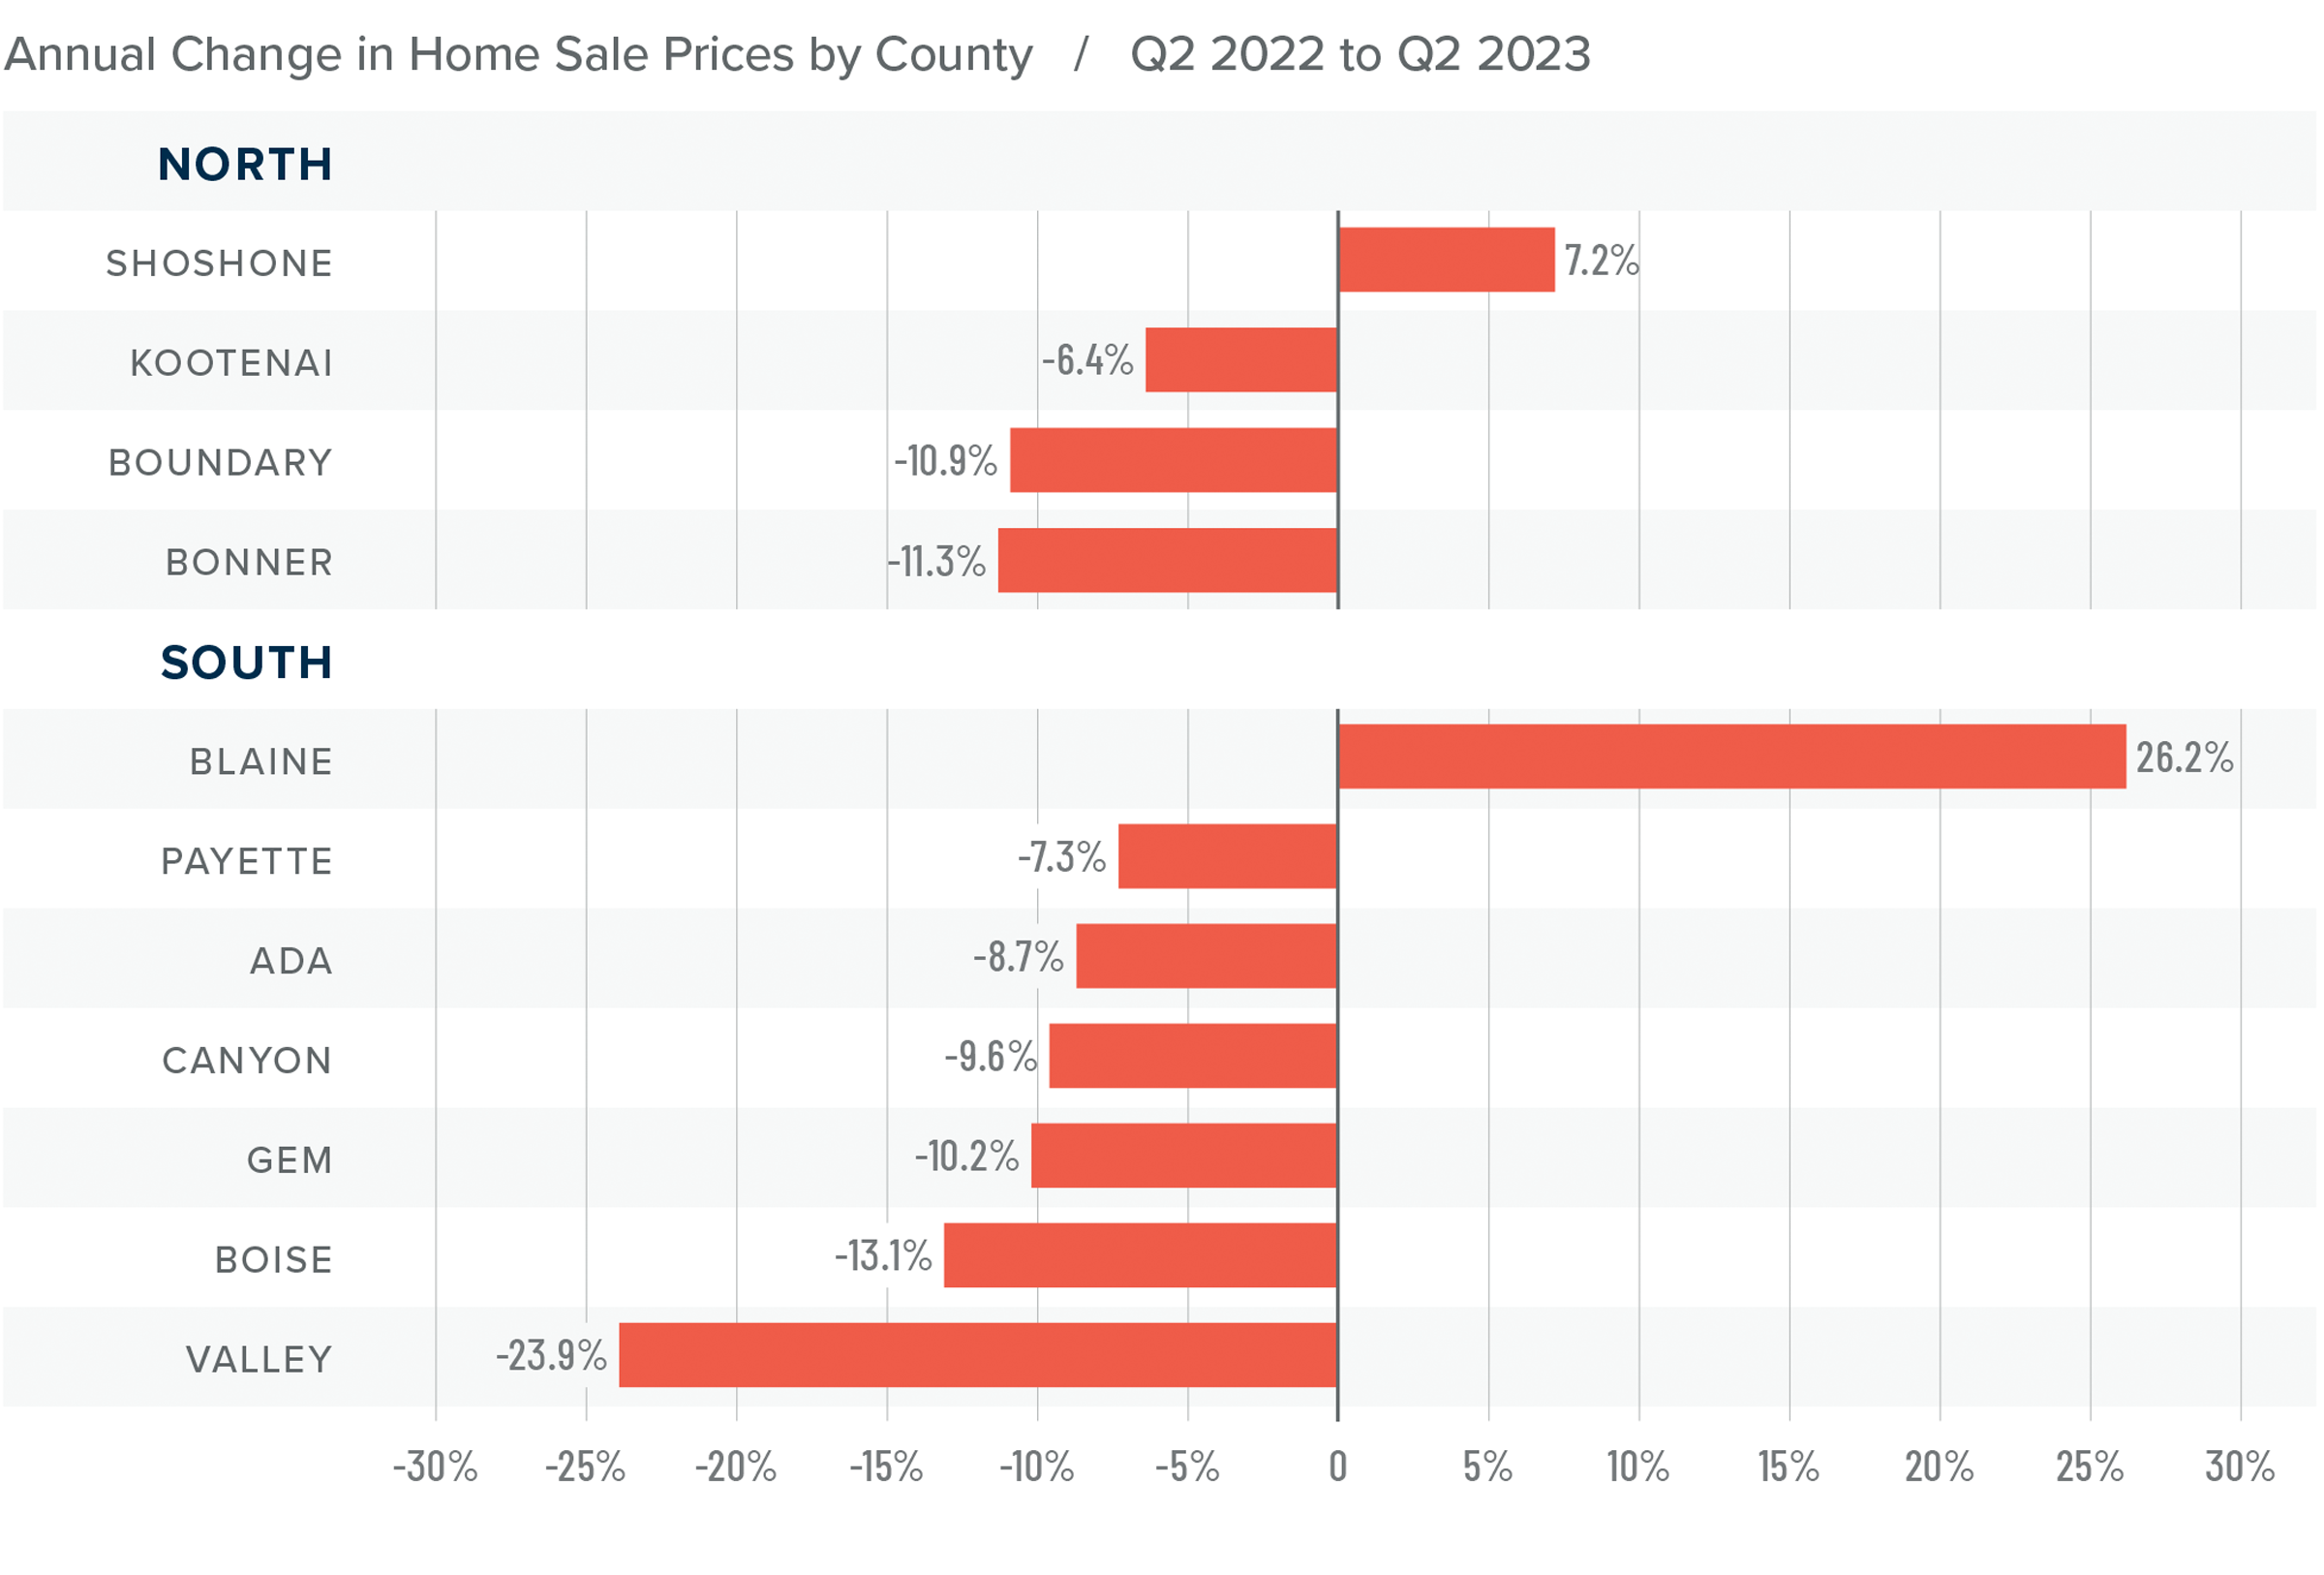 A bar graph showing the annual change in home sale prices by county in North and South Idaho from Q2 2022 to Q2 2023. Blaine County tops the list at 26.2%, while Valley County had the greatest decline at -23.9%. Boise and Bonner Counties were toward the middle at around -12%.